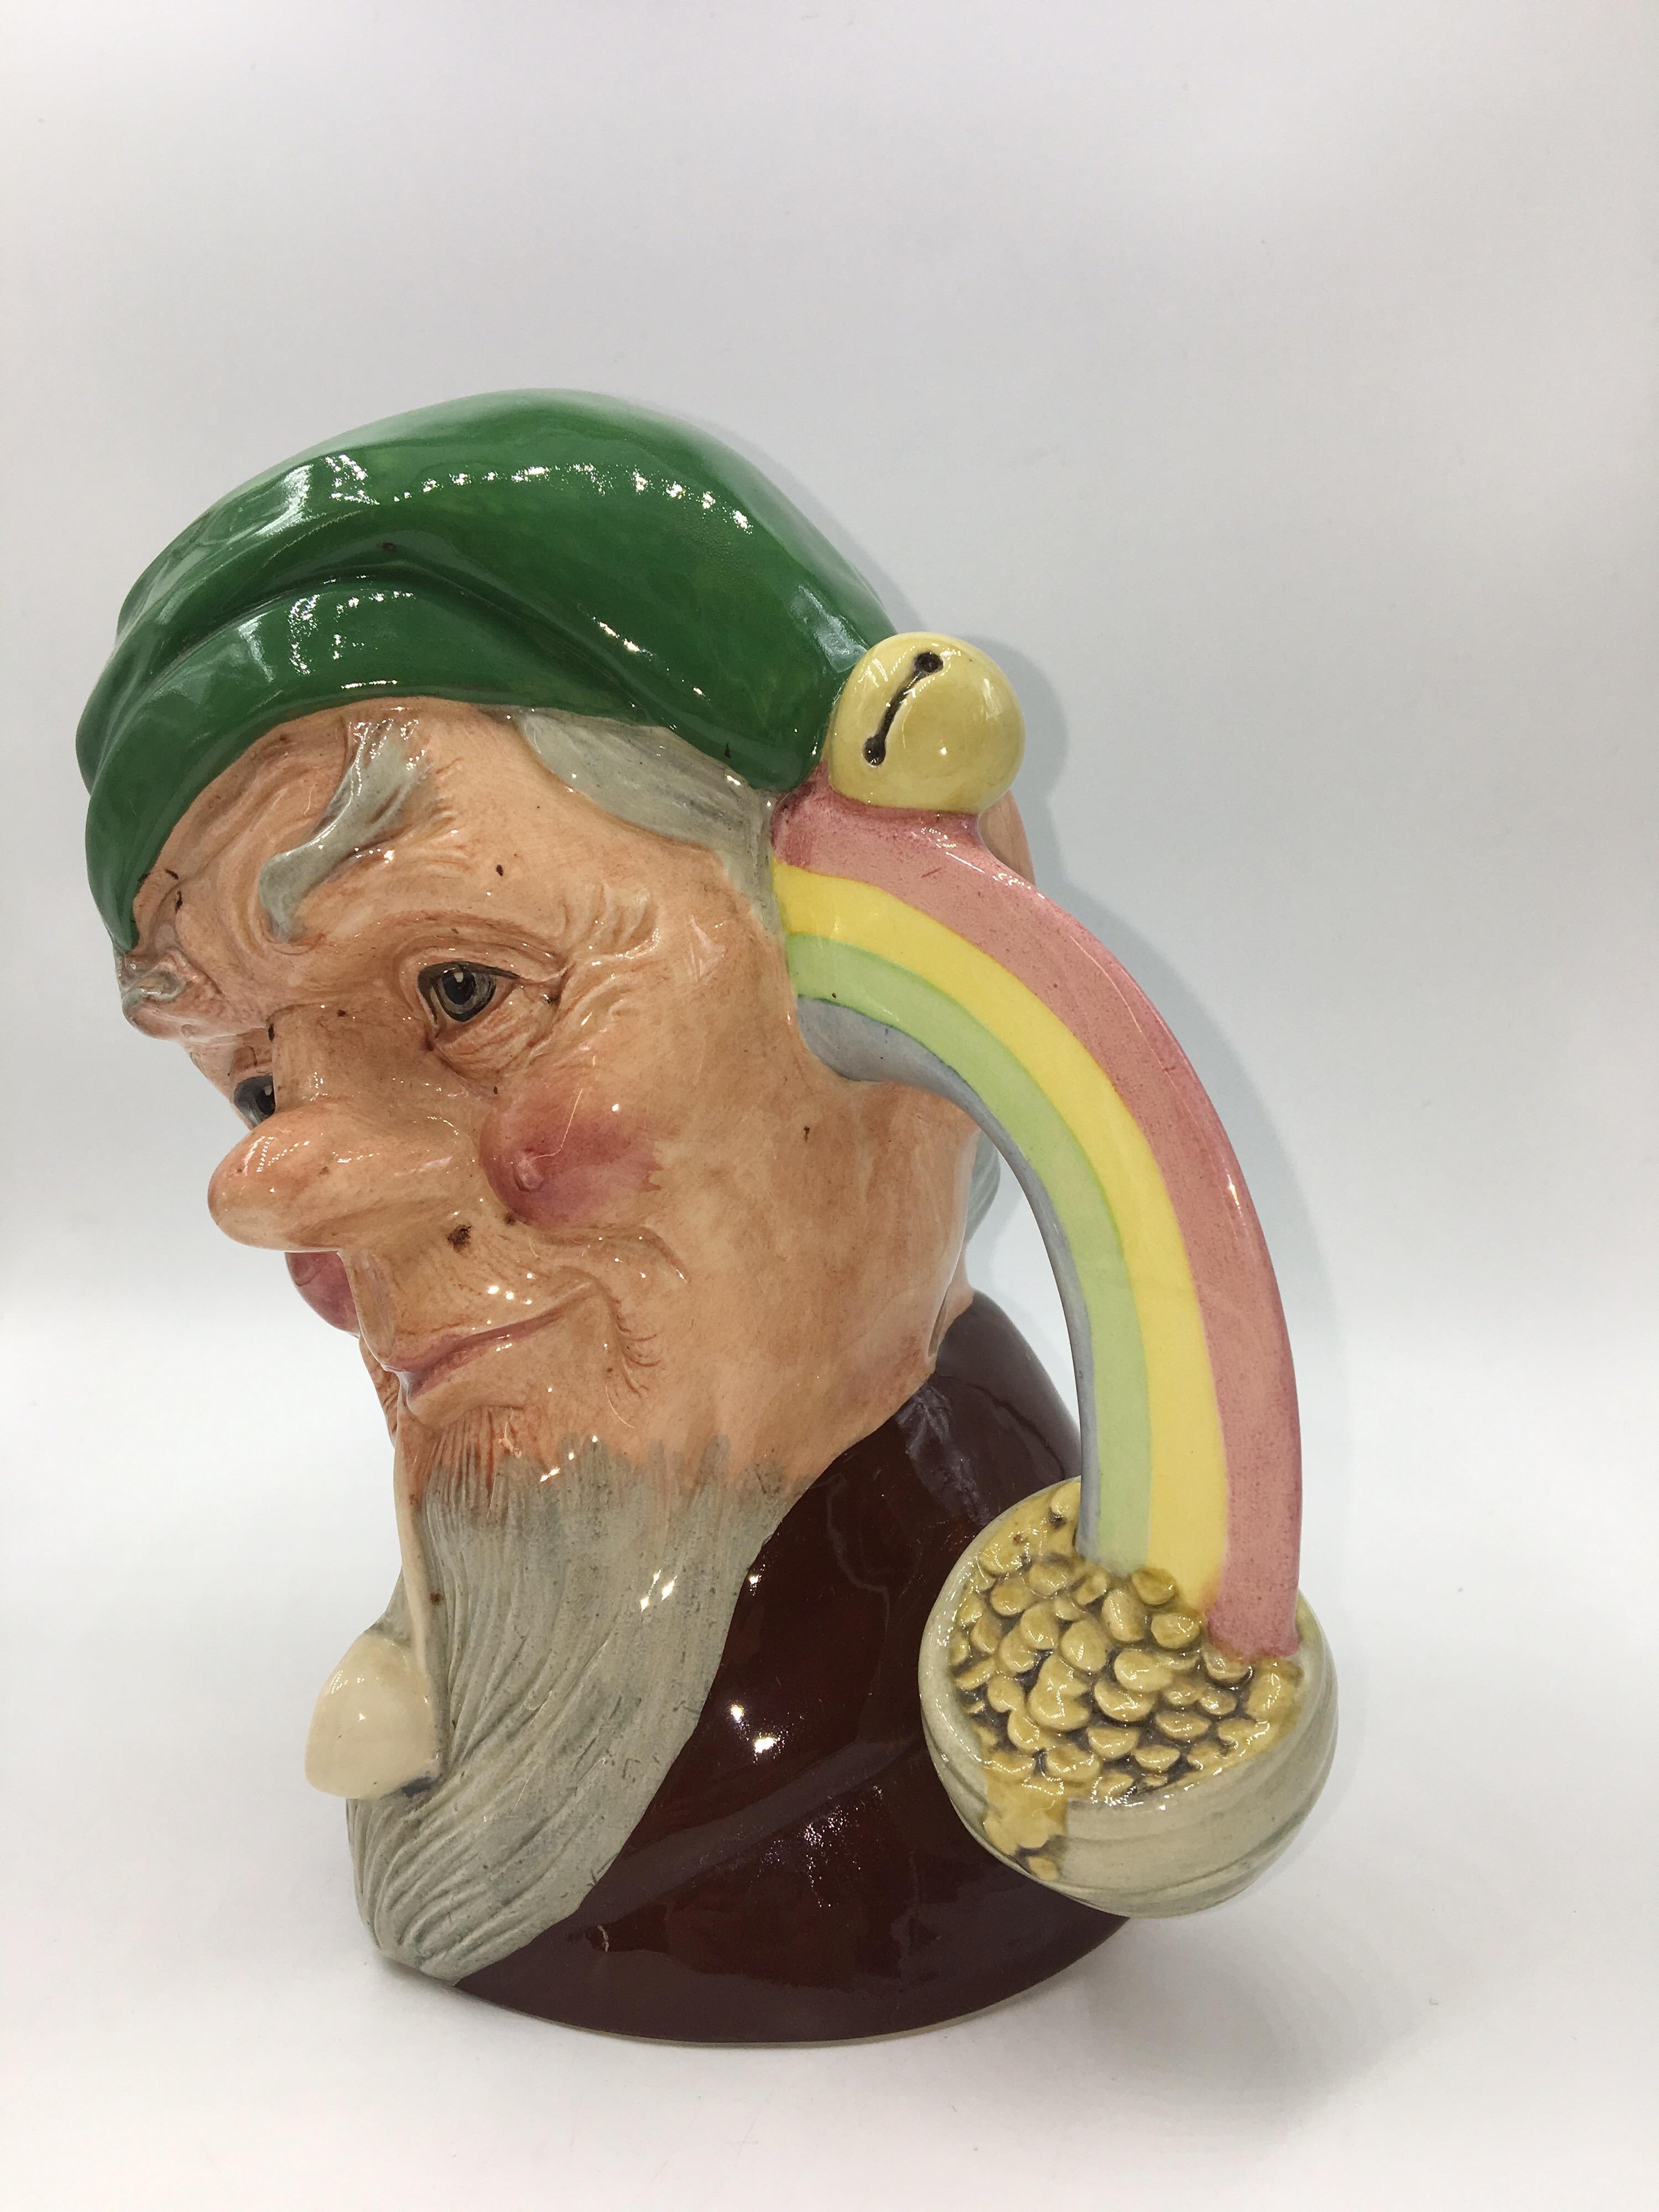 Royal Doulton character jug Leprechaun d6847, 1989 
Excellent condition. 
The wizened little elf is a legendary Irish sprite with a mischievous nature. The Irish believed that leprechauns guarded hoards of treasure hidden at the end of rainbows.